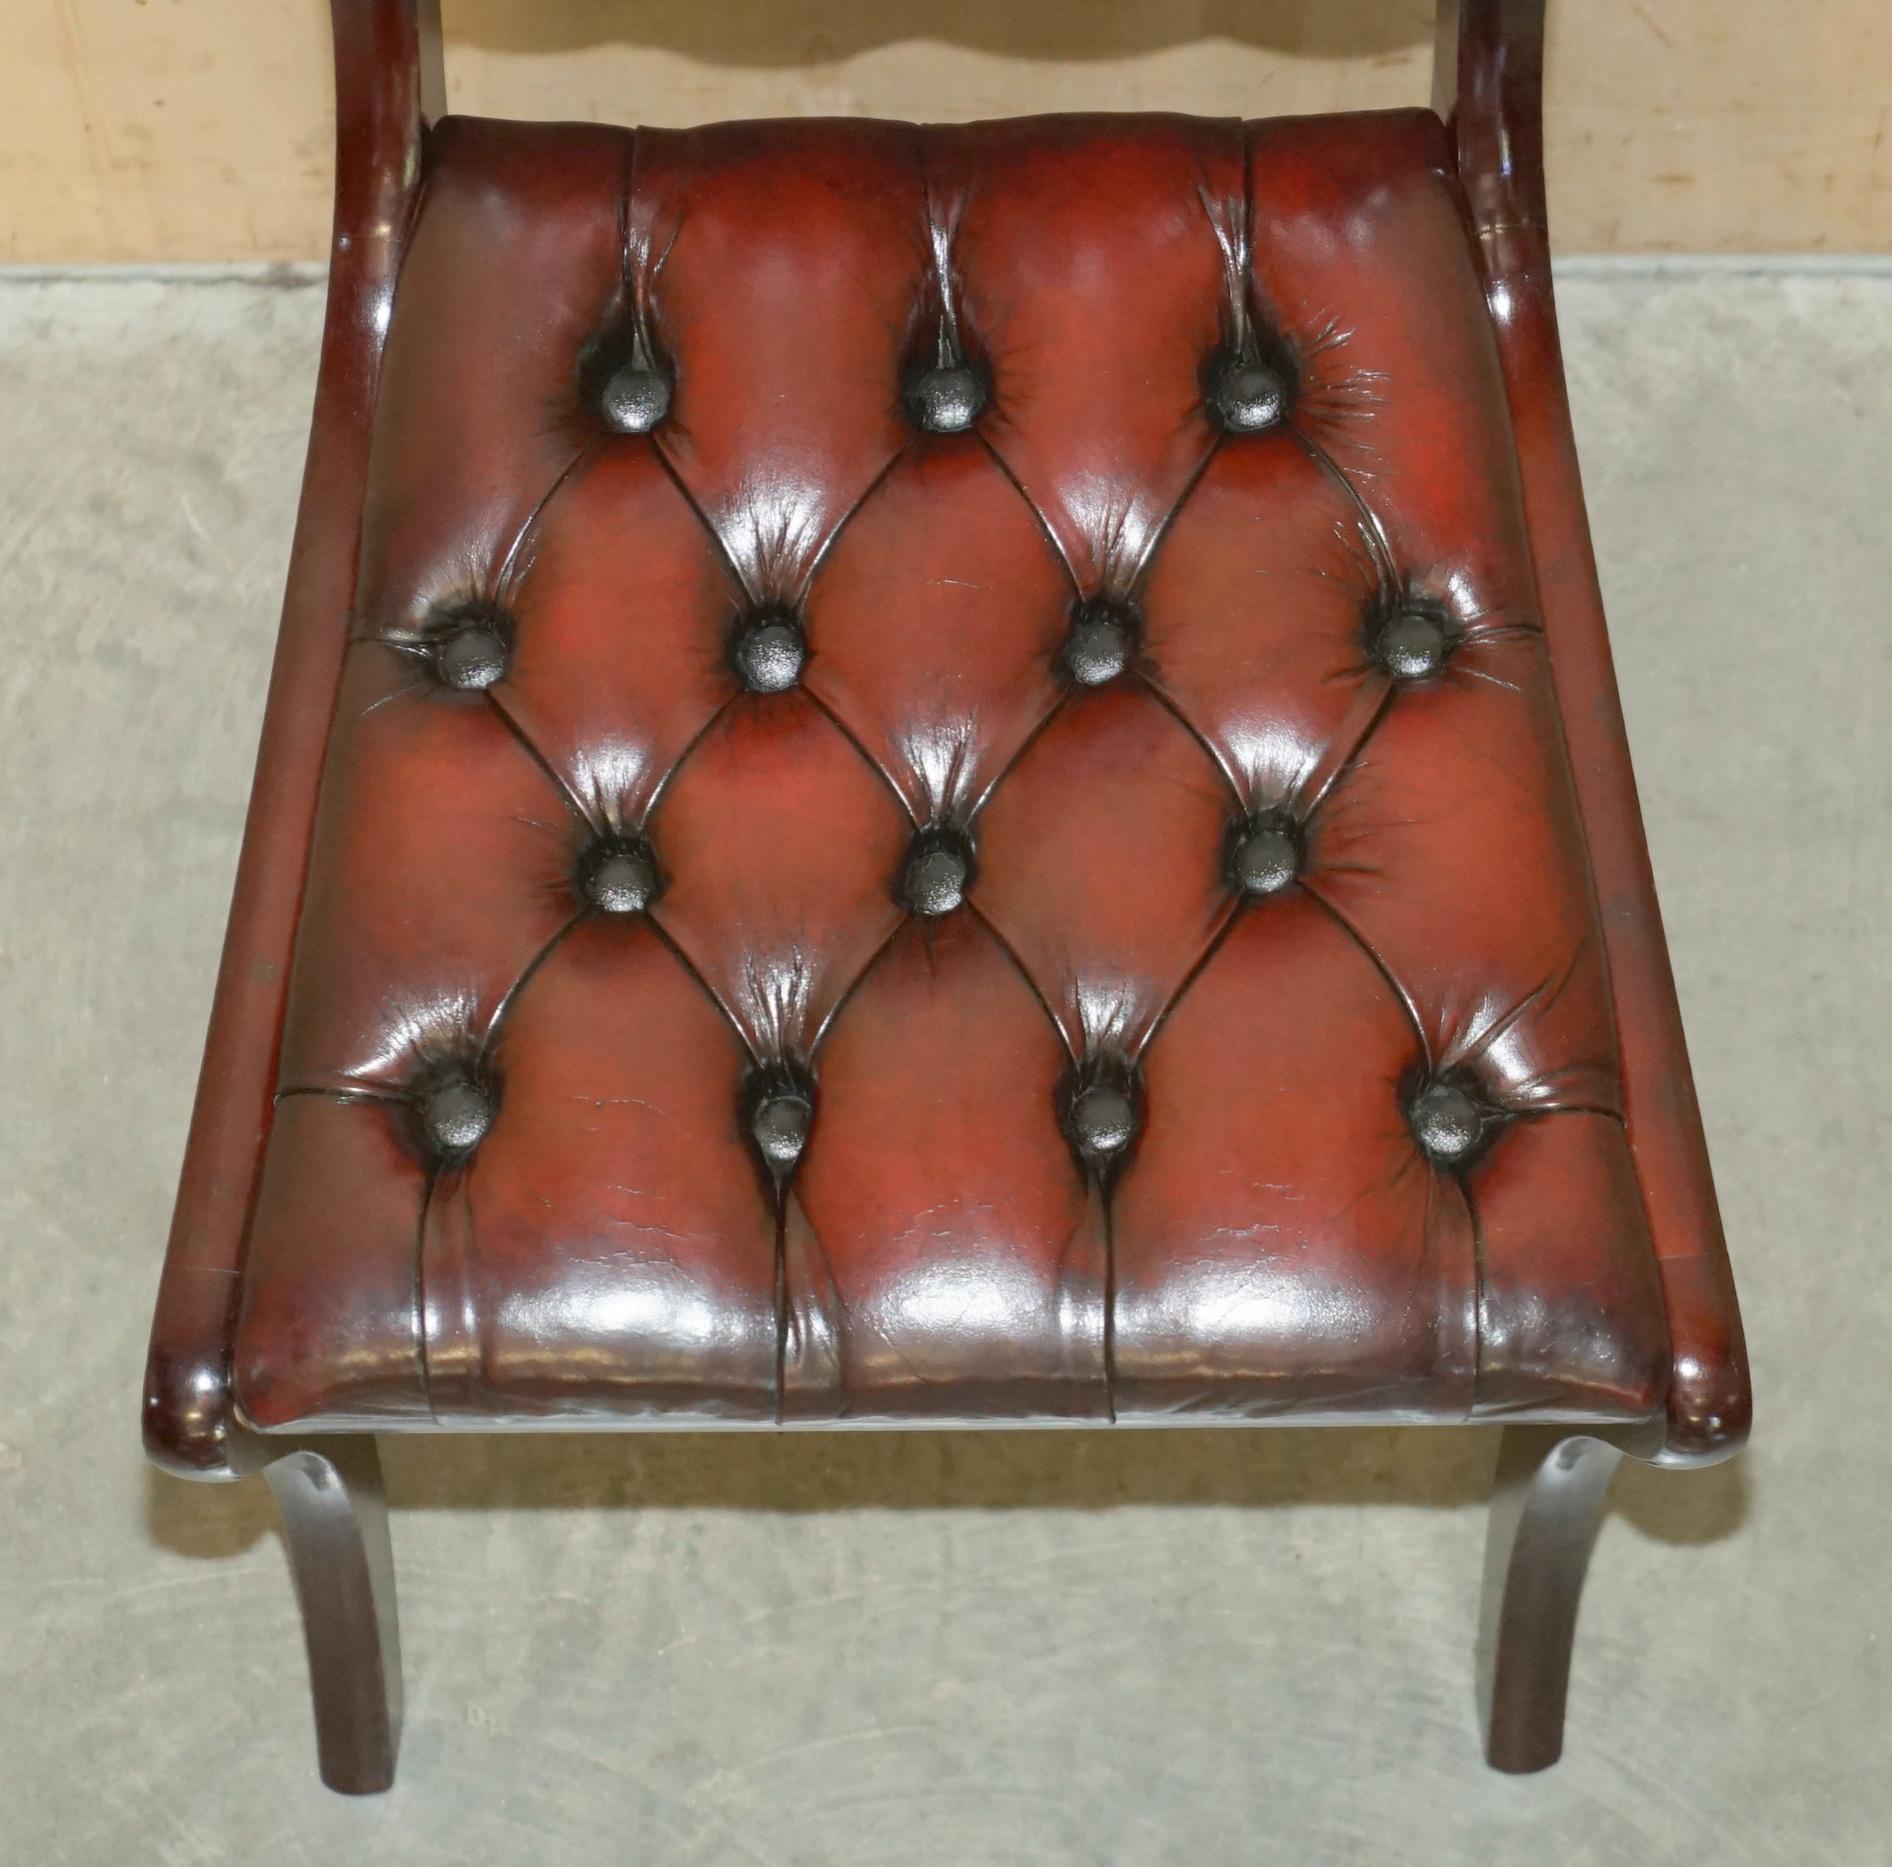 SIX VINTAGE HARDWOOD FULLY RESTORED CHESTERFIELD OXBOOD LEATHER DiNING CHAIRS 6 For Sale 8